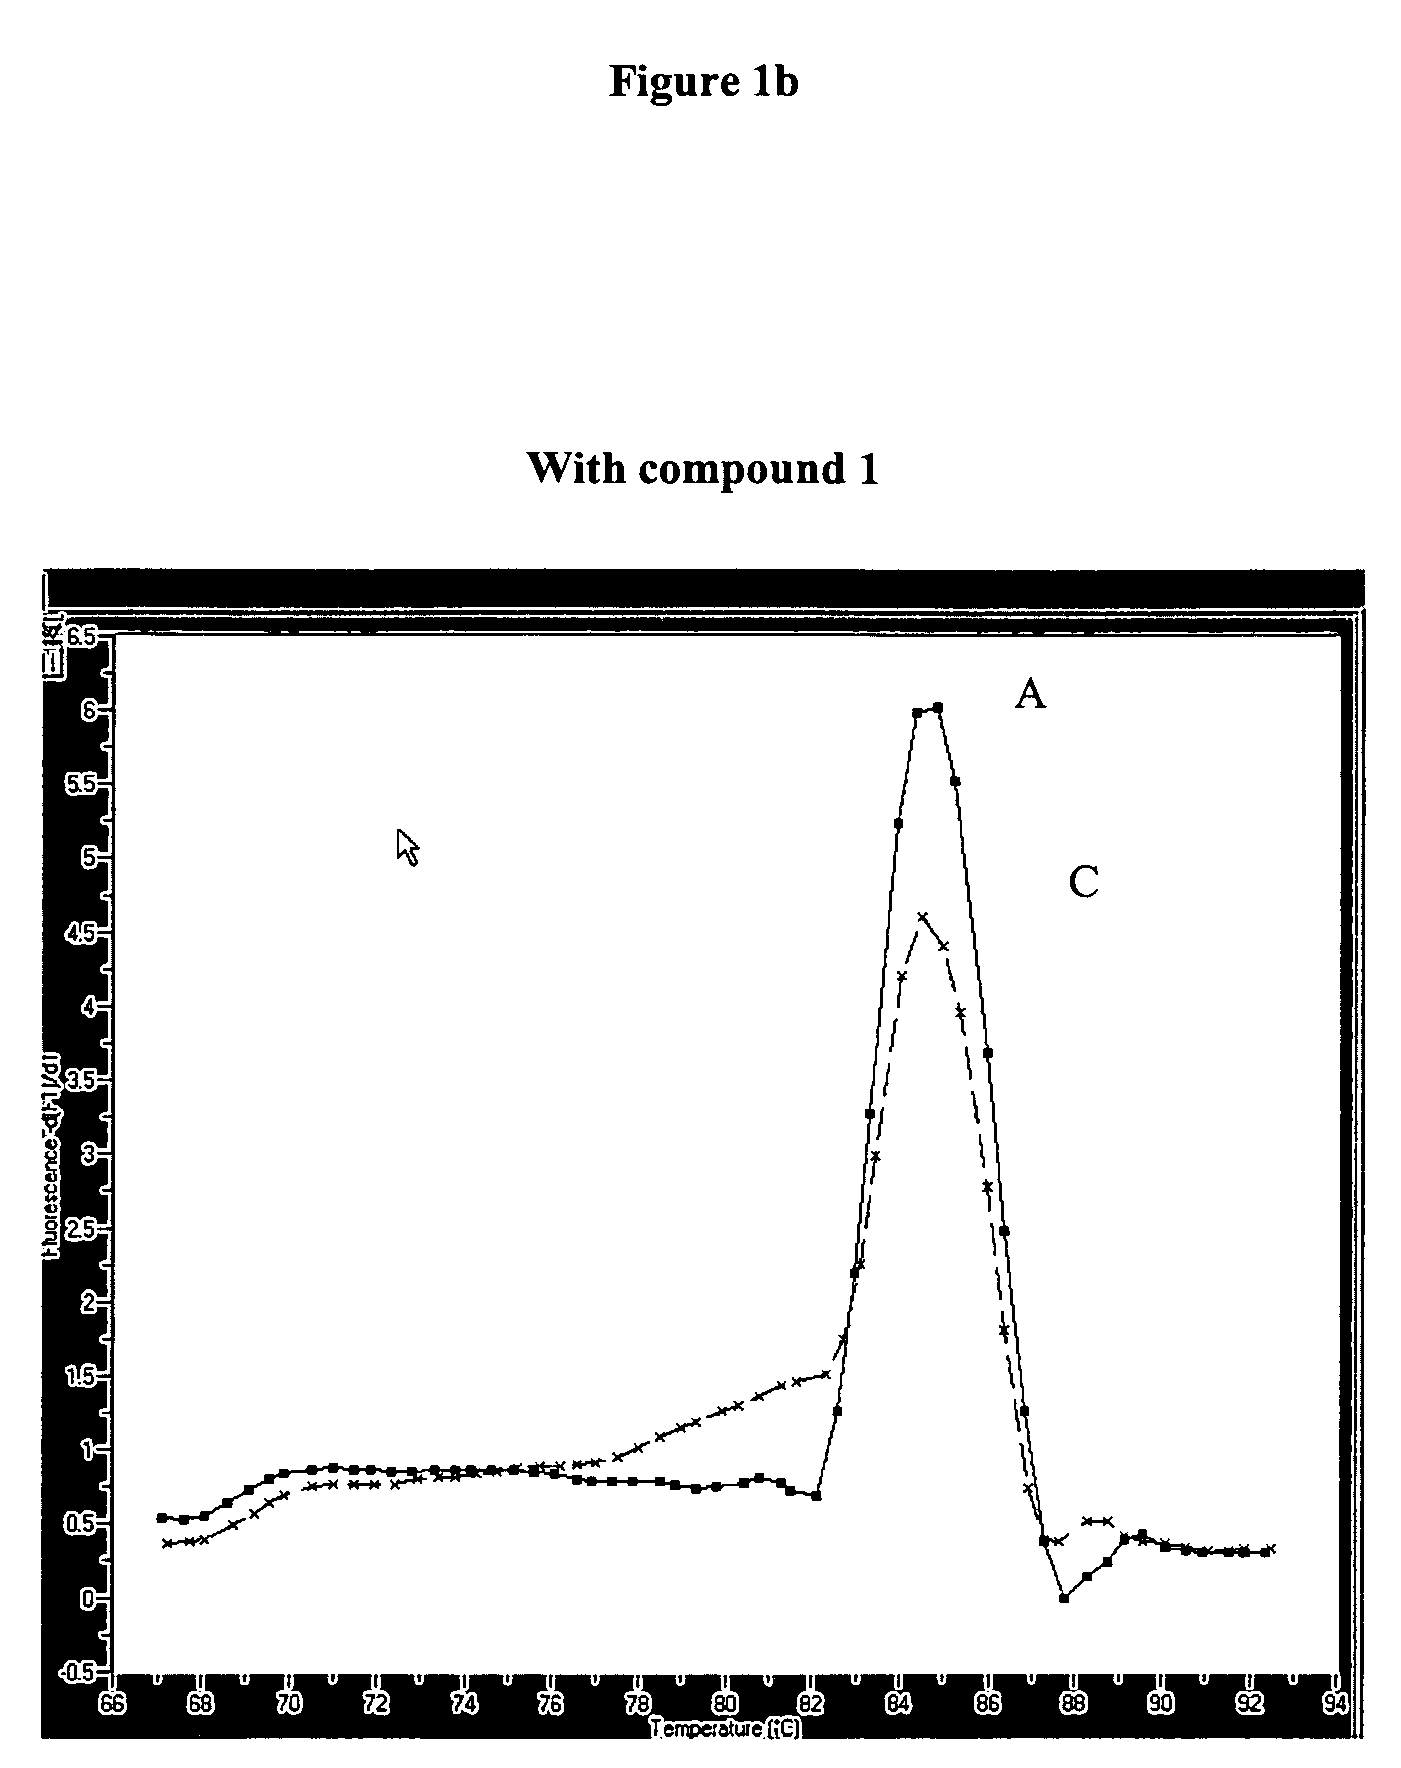 Benzimidazolium compounds and salts of benzimidazolium compounds for nucleic acid amplification